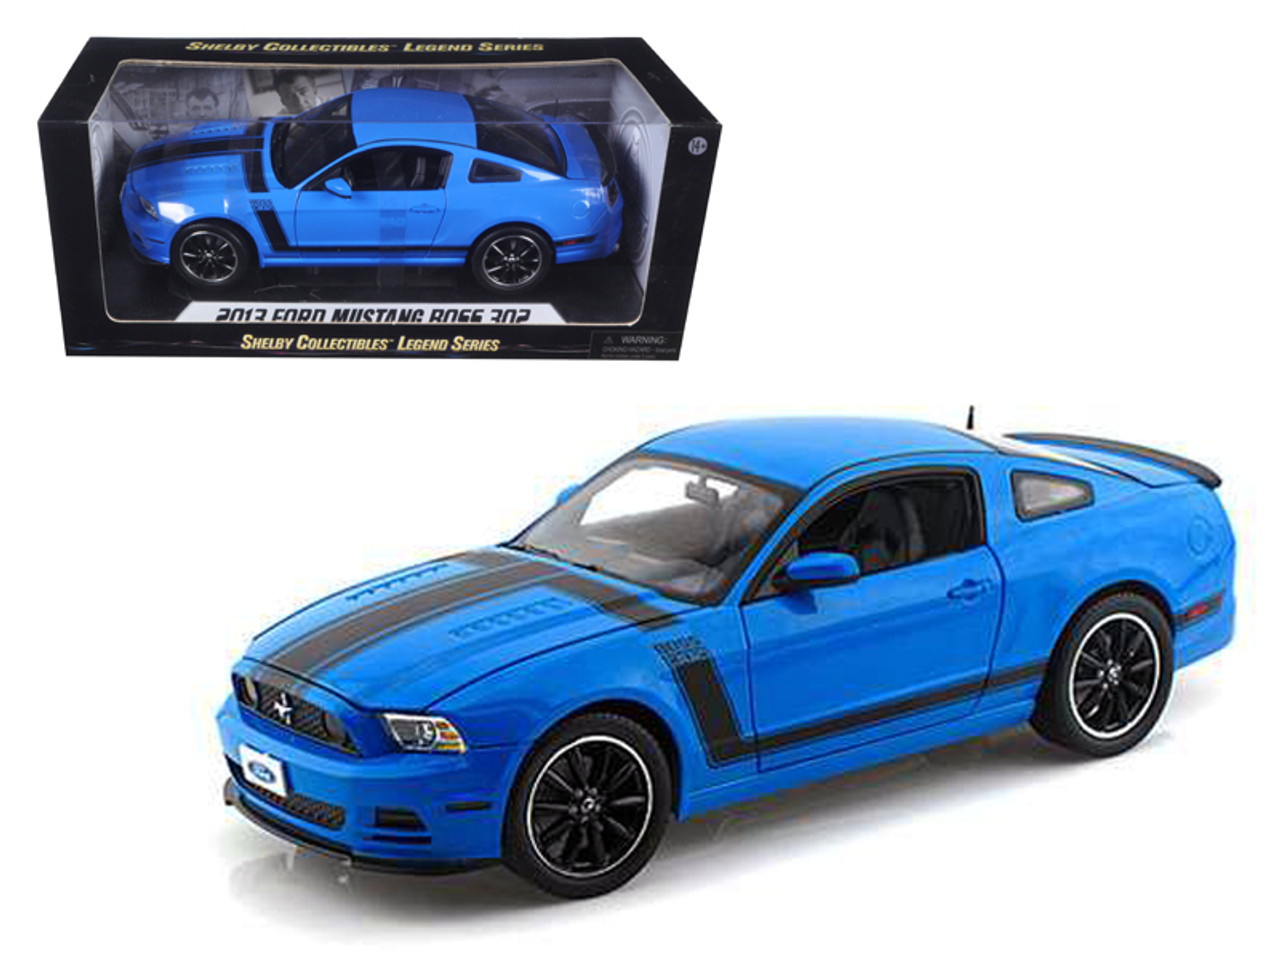 Details about   Shelby Collectibles SC454 2013 Ford Mustang Boss 302 Red 1-18 Diecast Car Model 